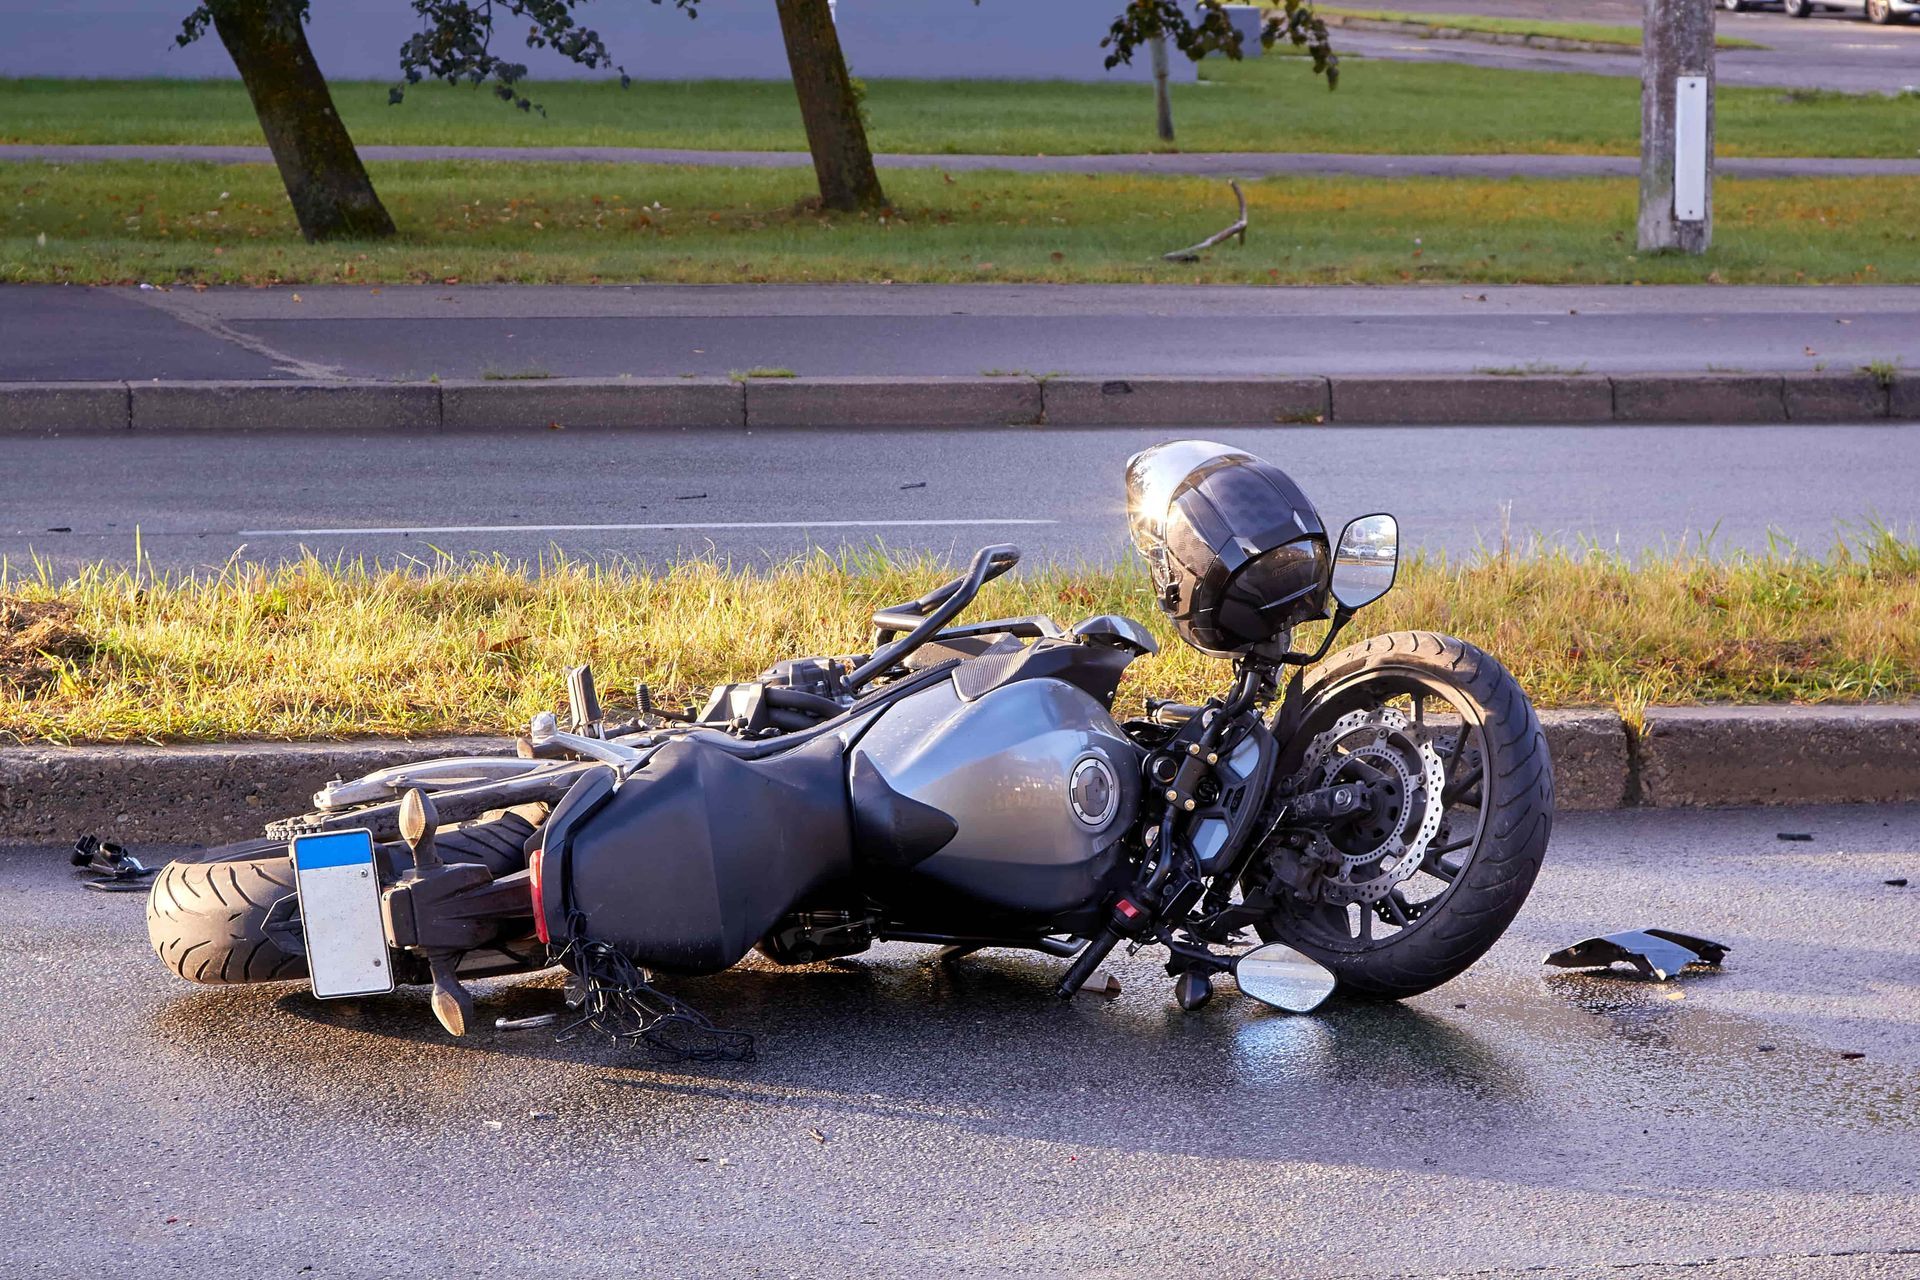 a motorcycle spilled on the ground